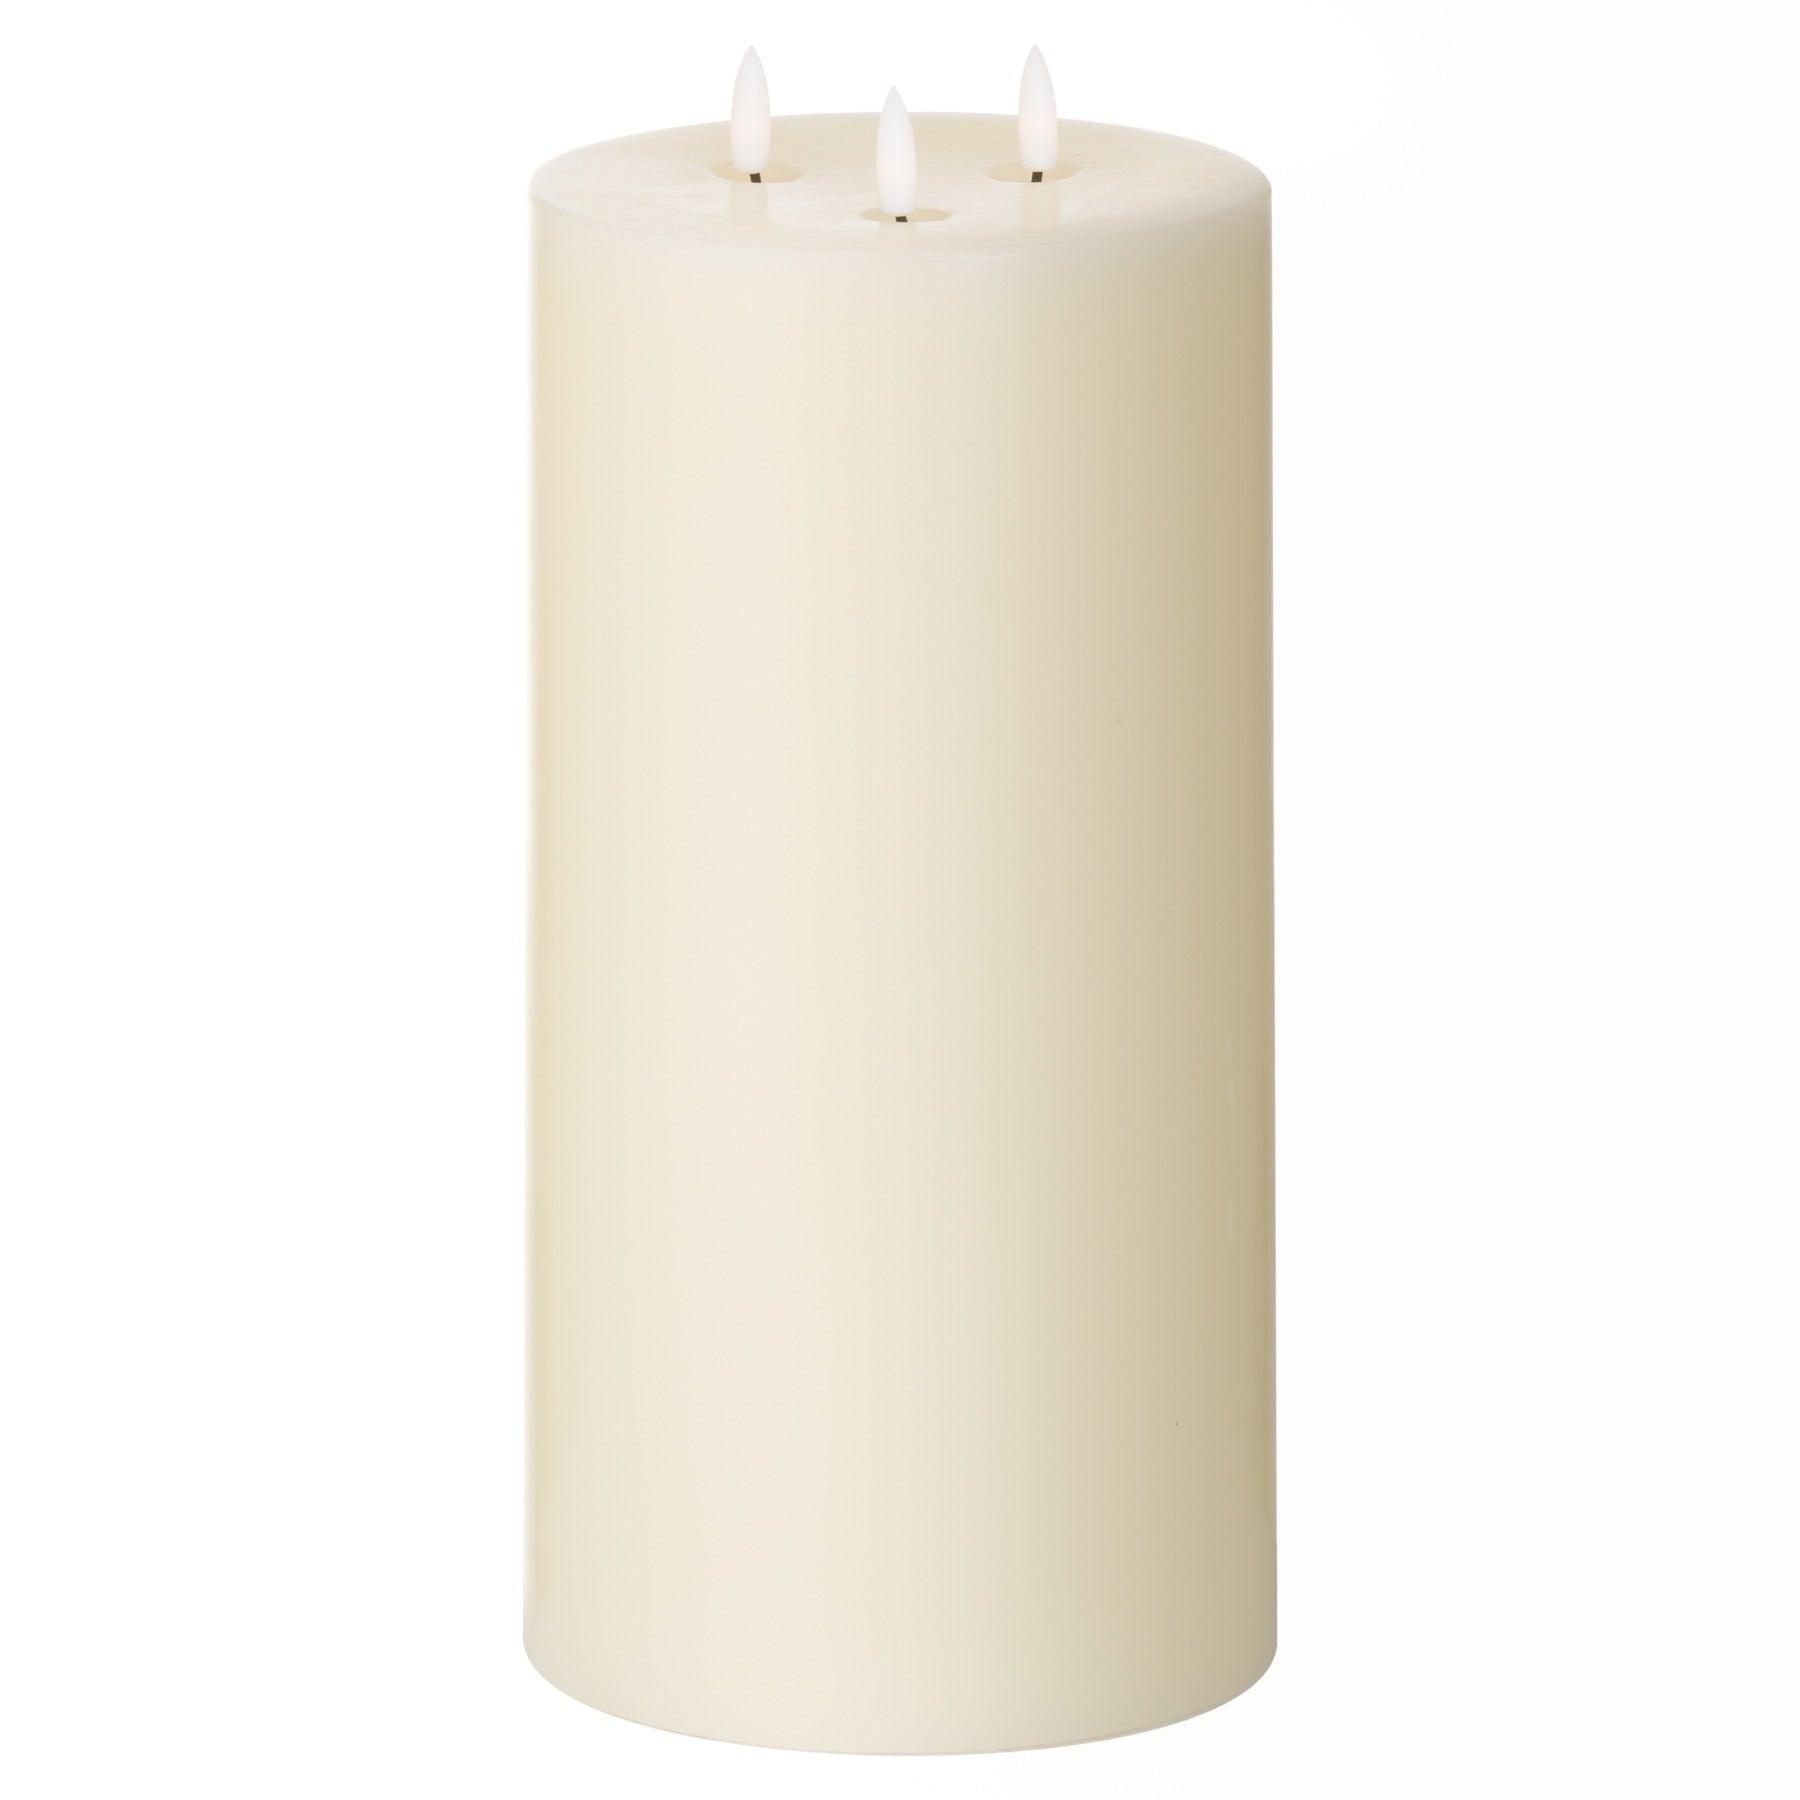 View Luxe Collection Natural Glow 6 x 12 LED Ivory Candle information